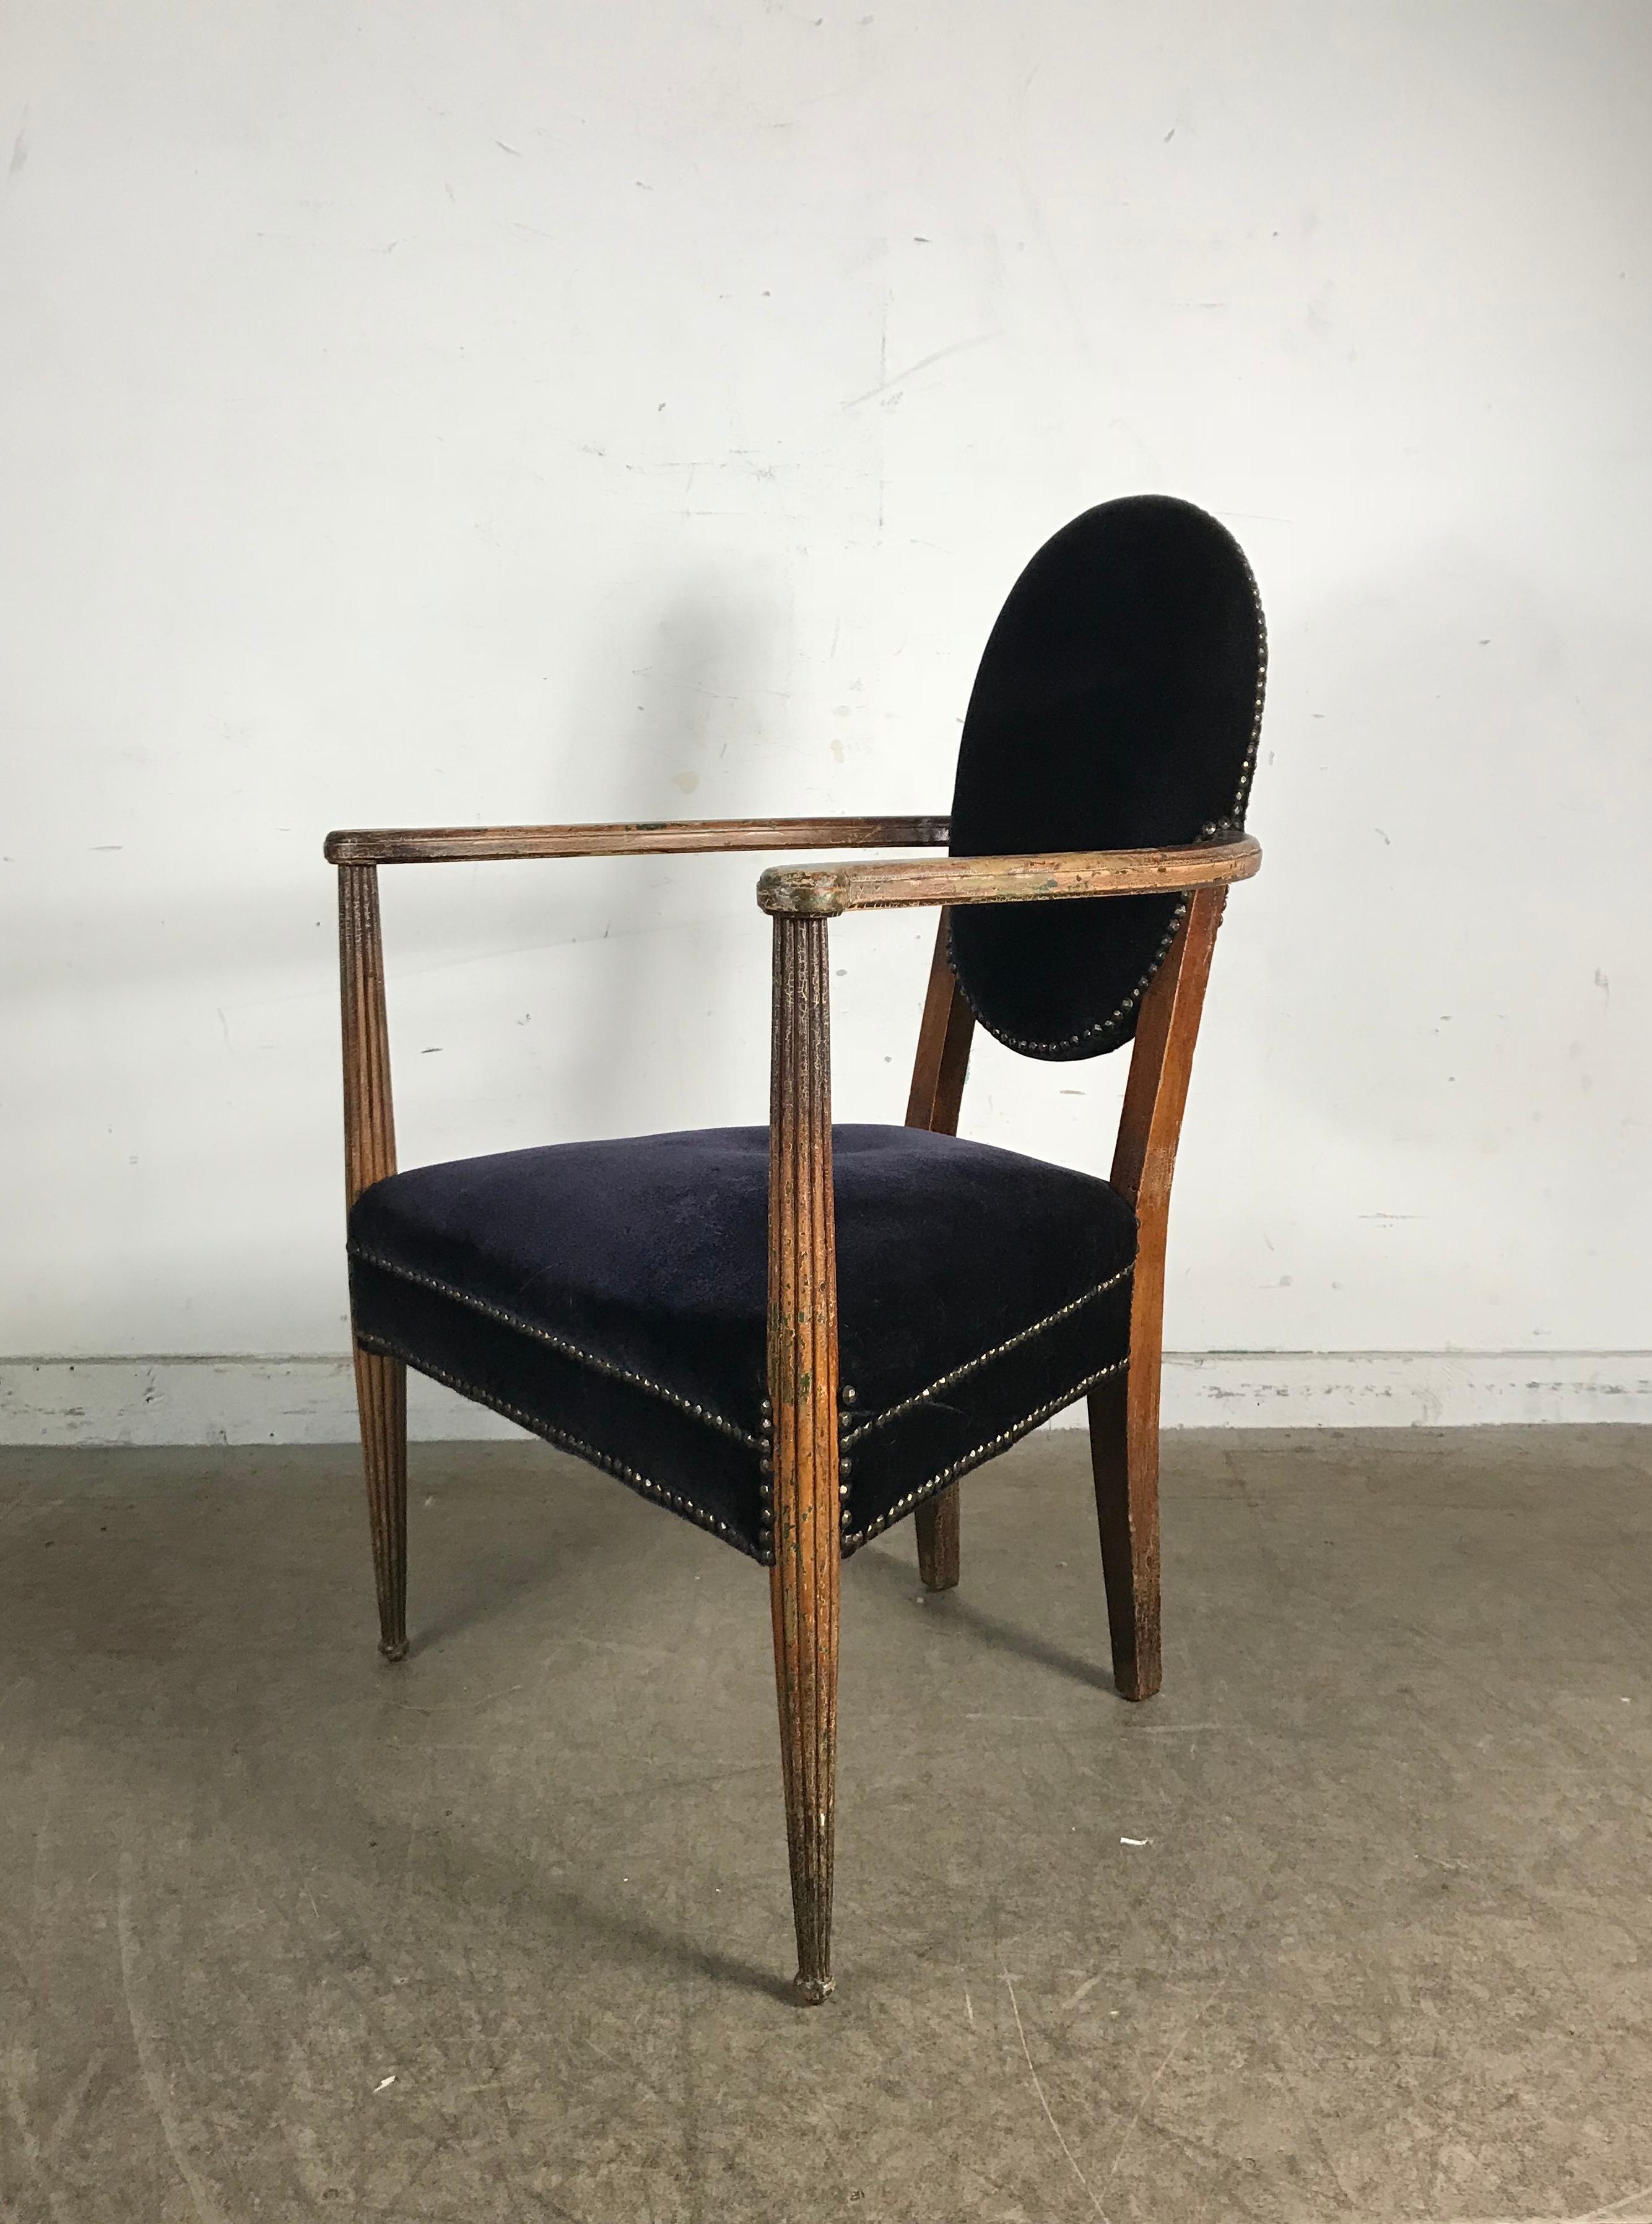 Stunning French Art Deco arm, lounge chair, unusual oval back design. Retains original distressed finish, patina as well as what appears to be original mohair fabric, Classic French Art Deco.